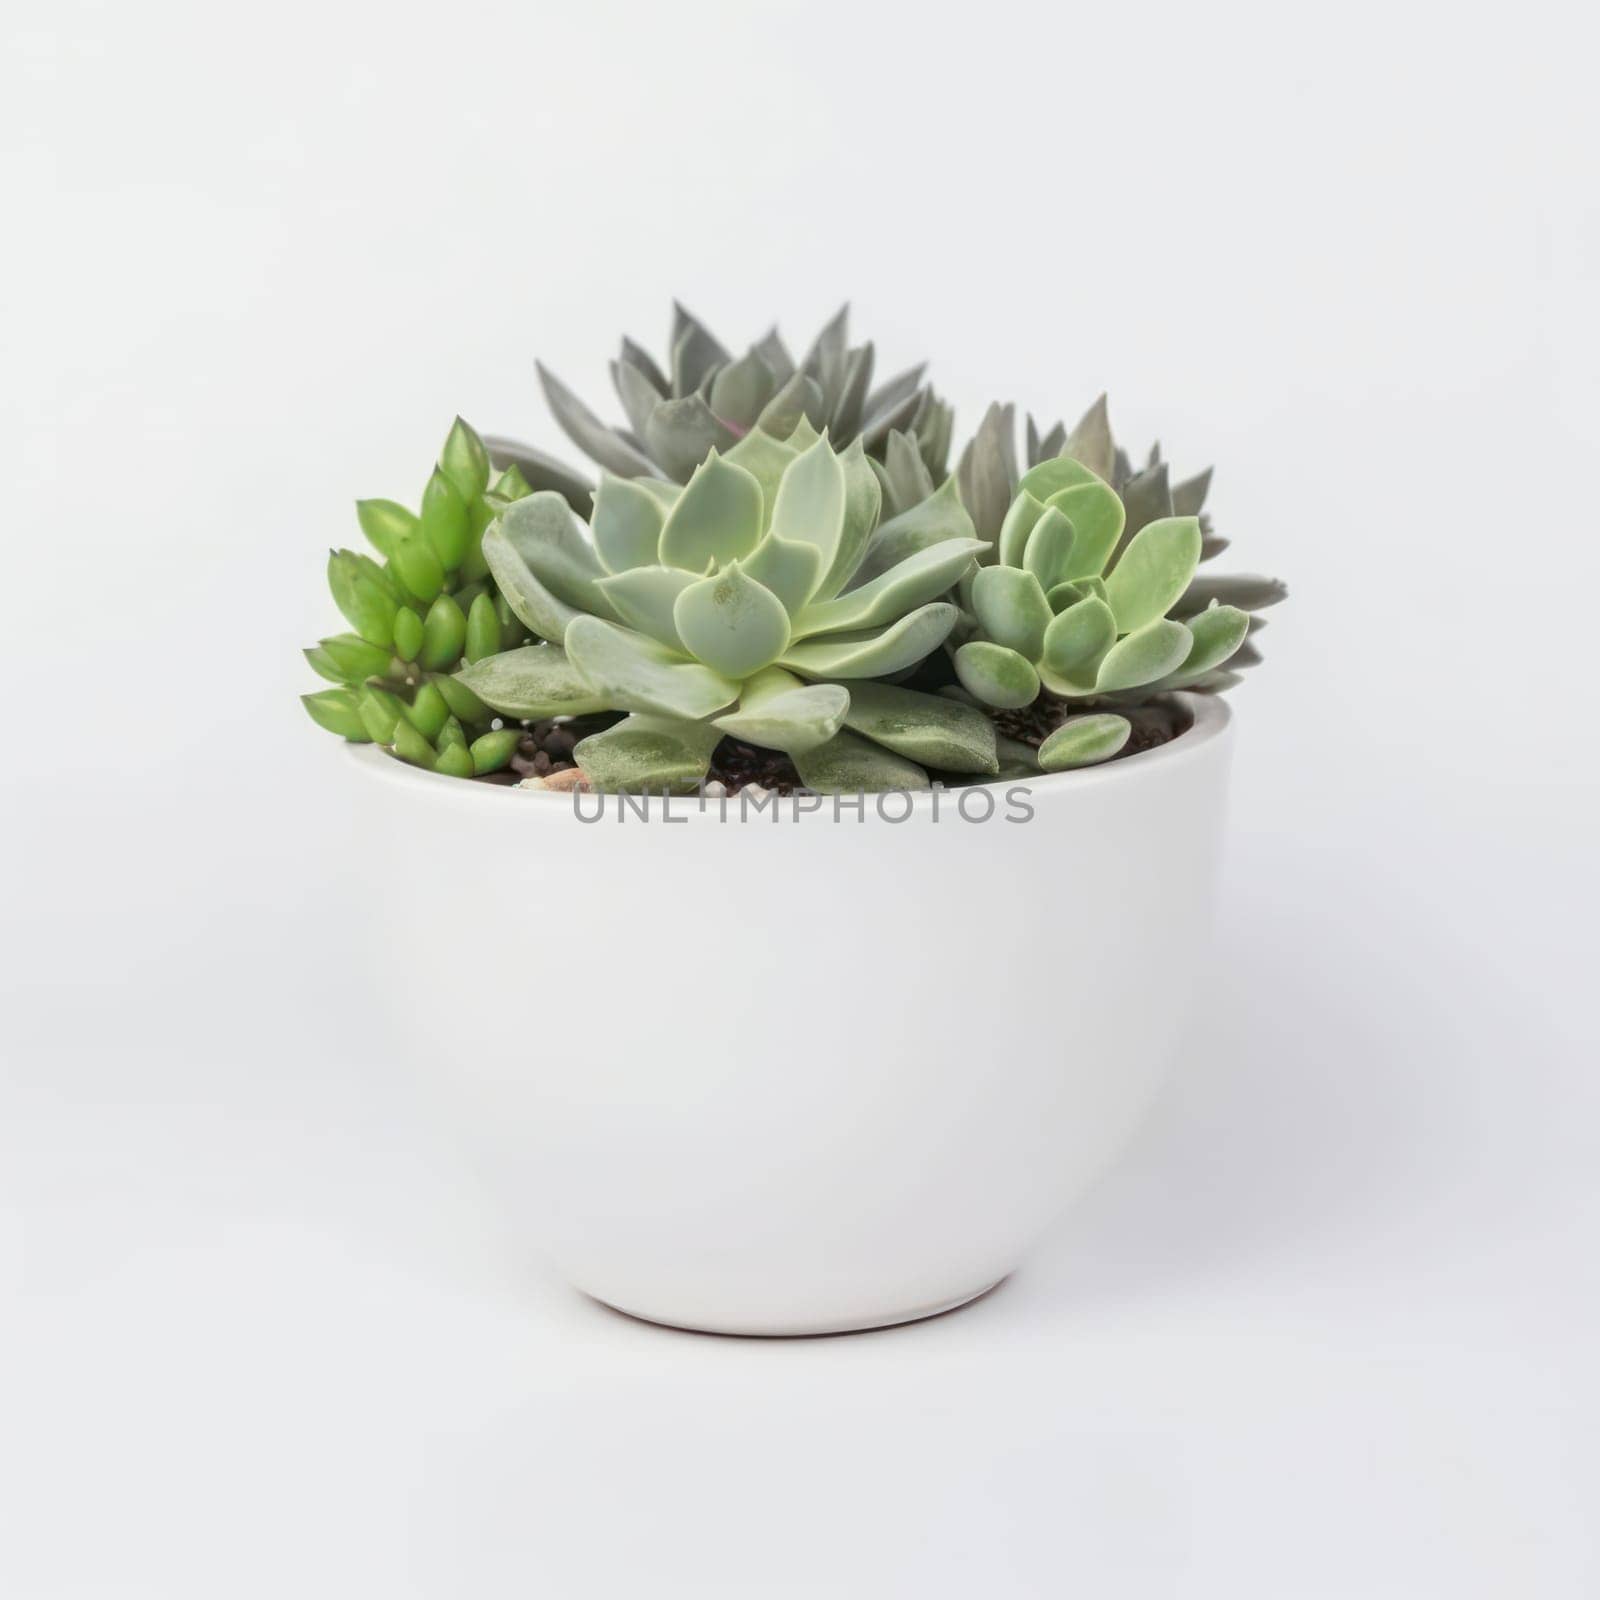 Decorate your space with beautiful succulents in stylish containers by Sorapop